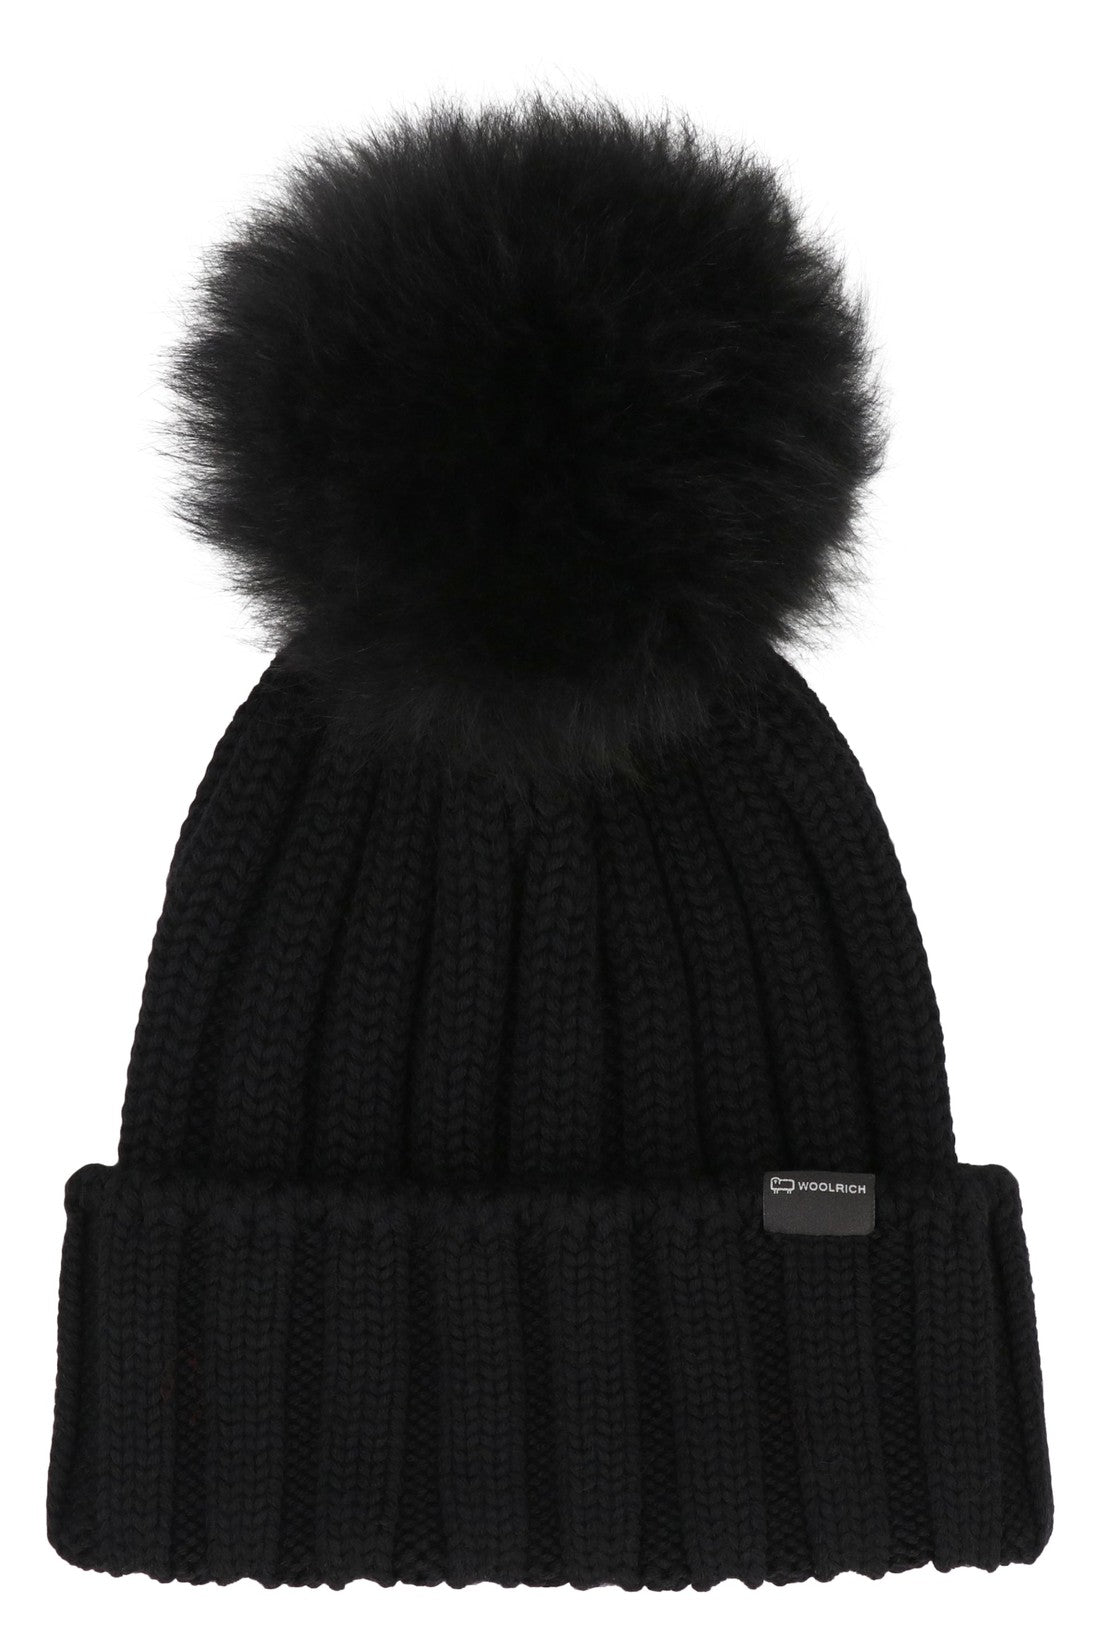 Woolrich-OUTLET-SALE-Knitted wool beanie with pom-pom-ARCHIVIST